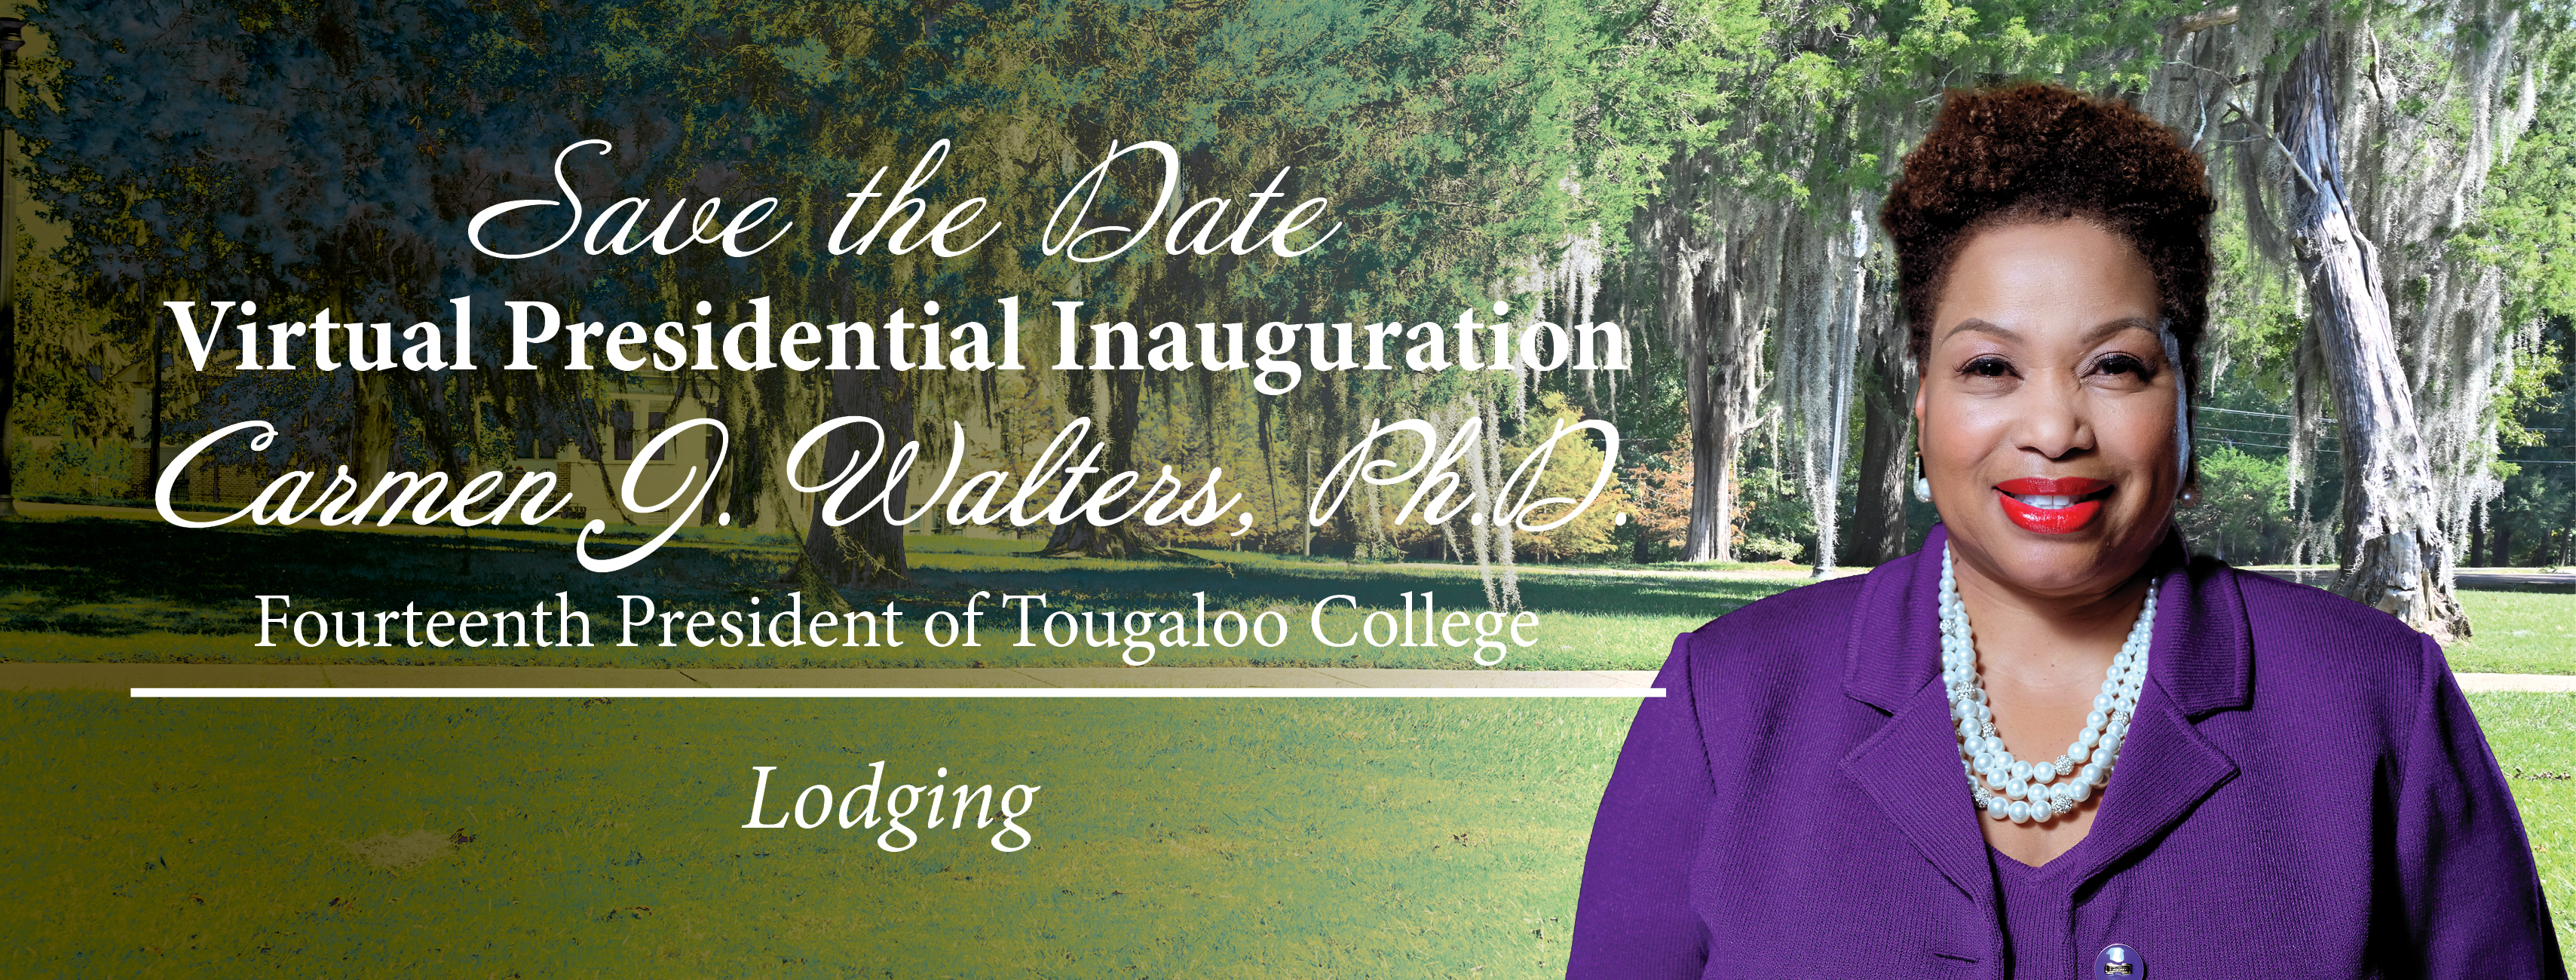 Lodging for the Presidential Inauguration